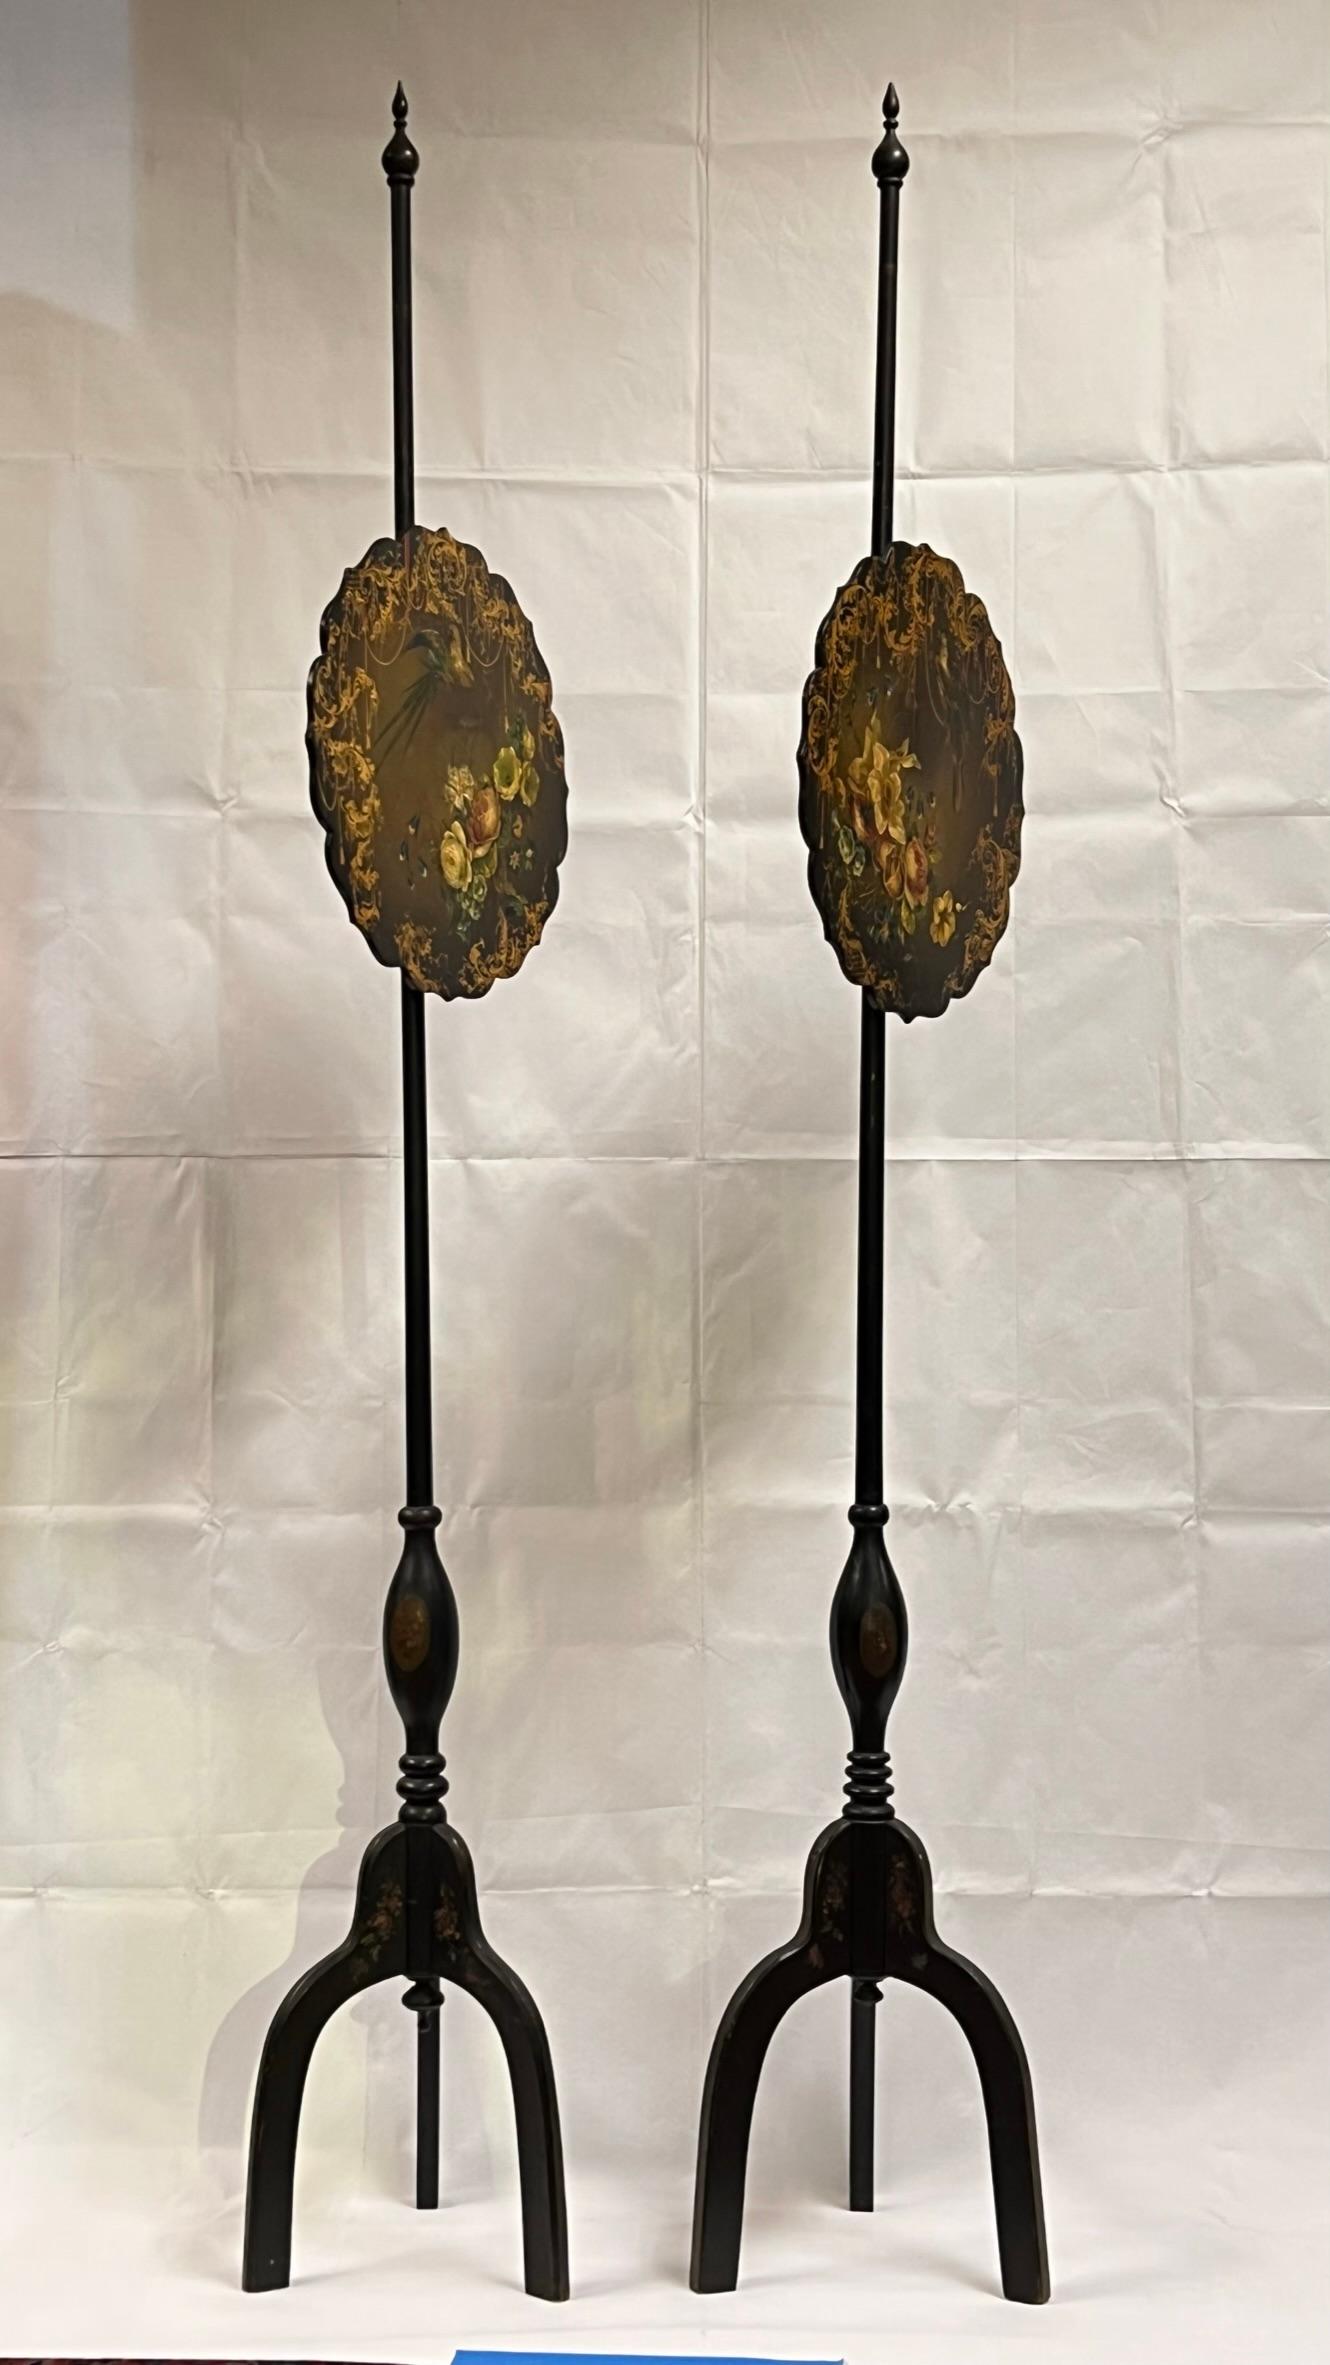 Pair of ebonized pole screens with fine floral painted finishes on tripod legs.